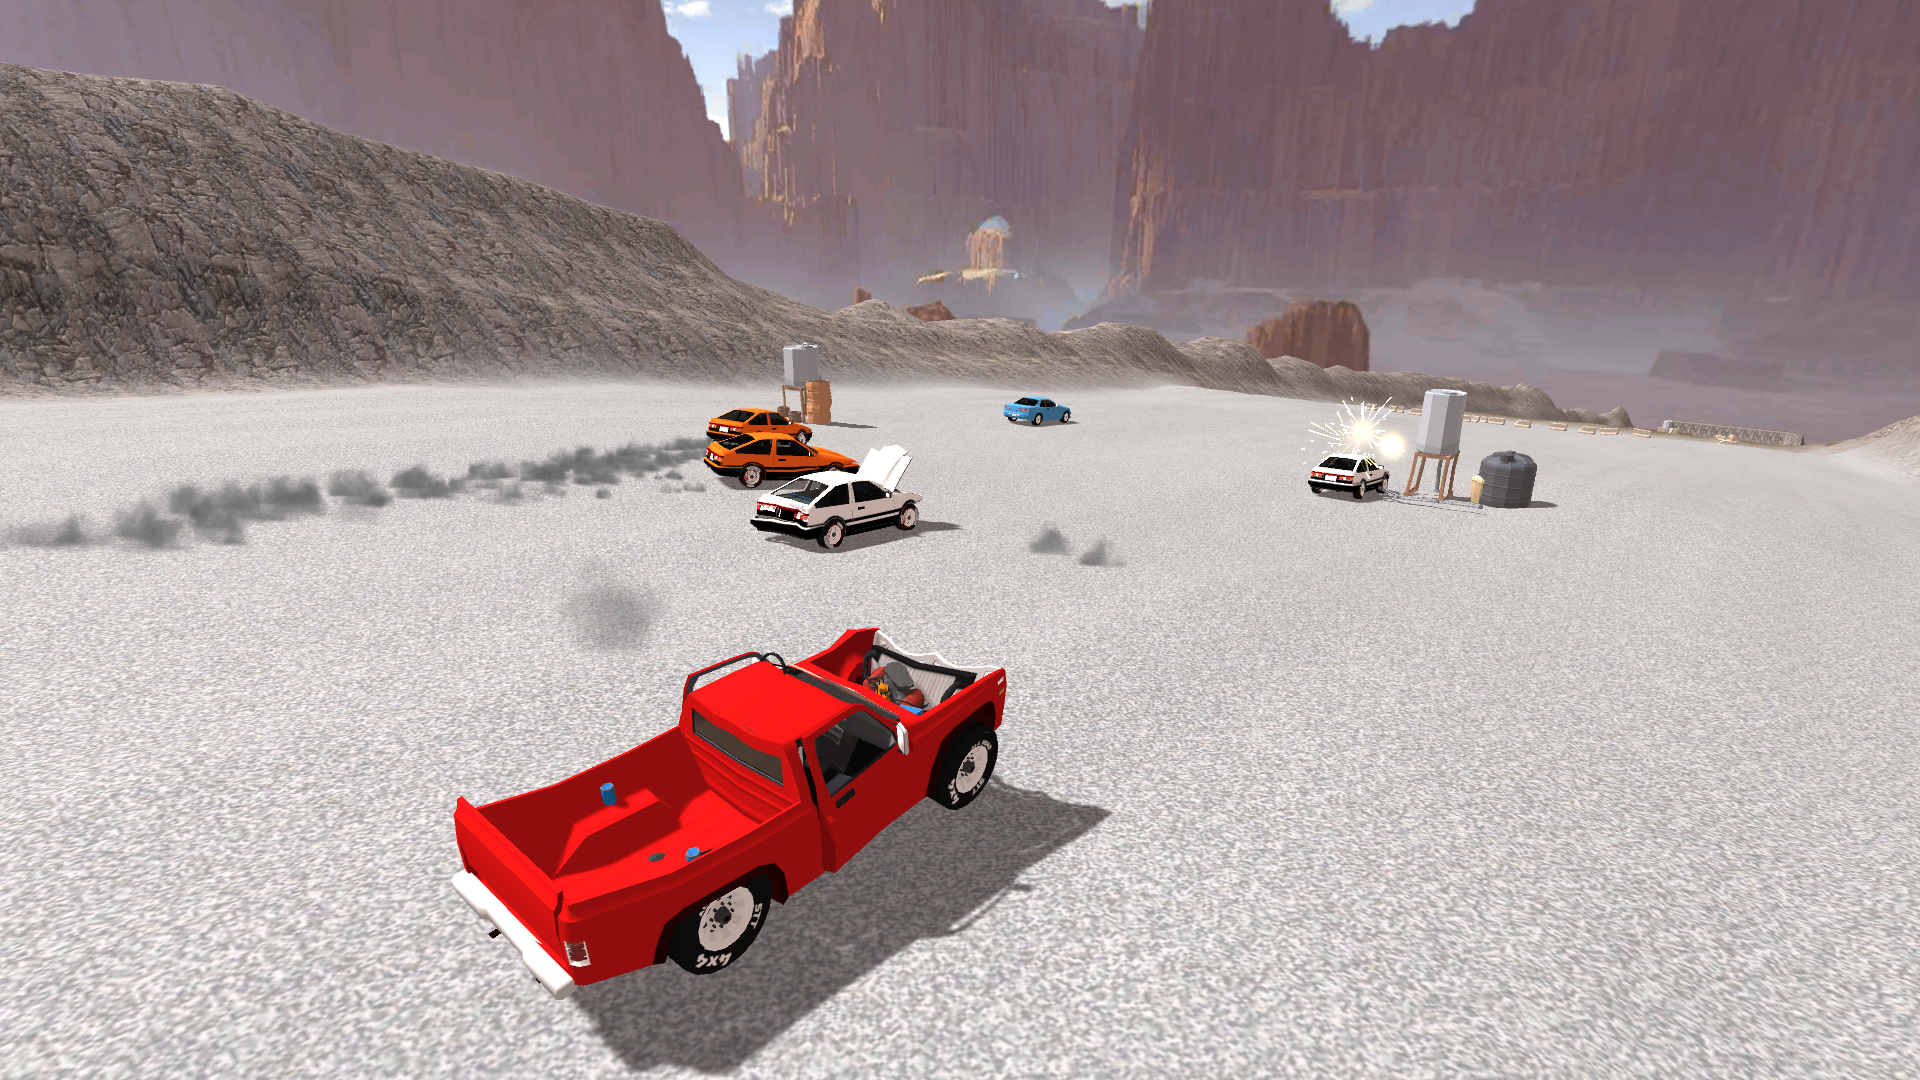 Car crash games — play online for free on Yandex Games